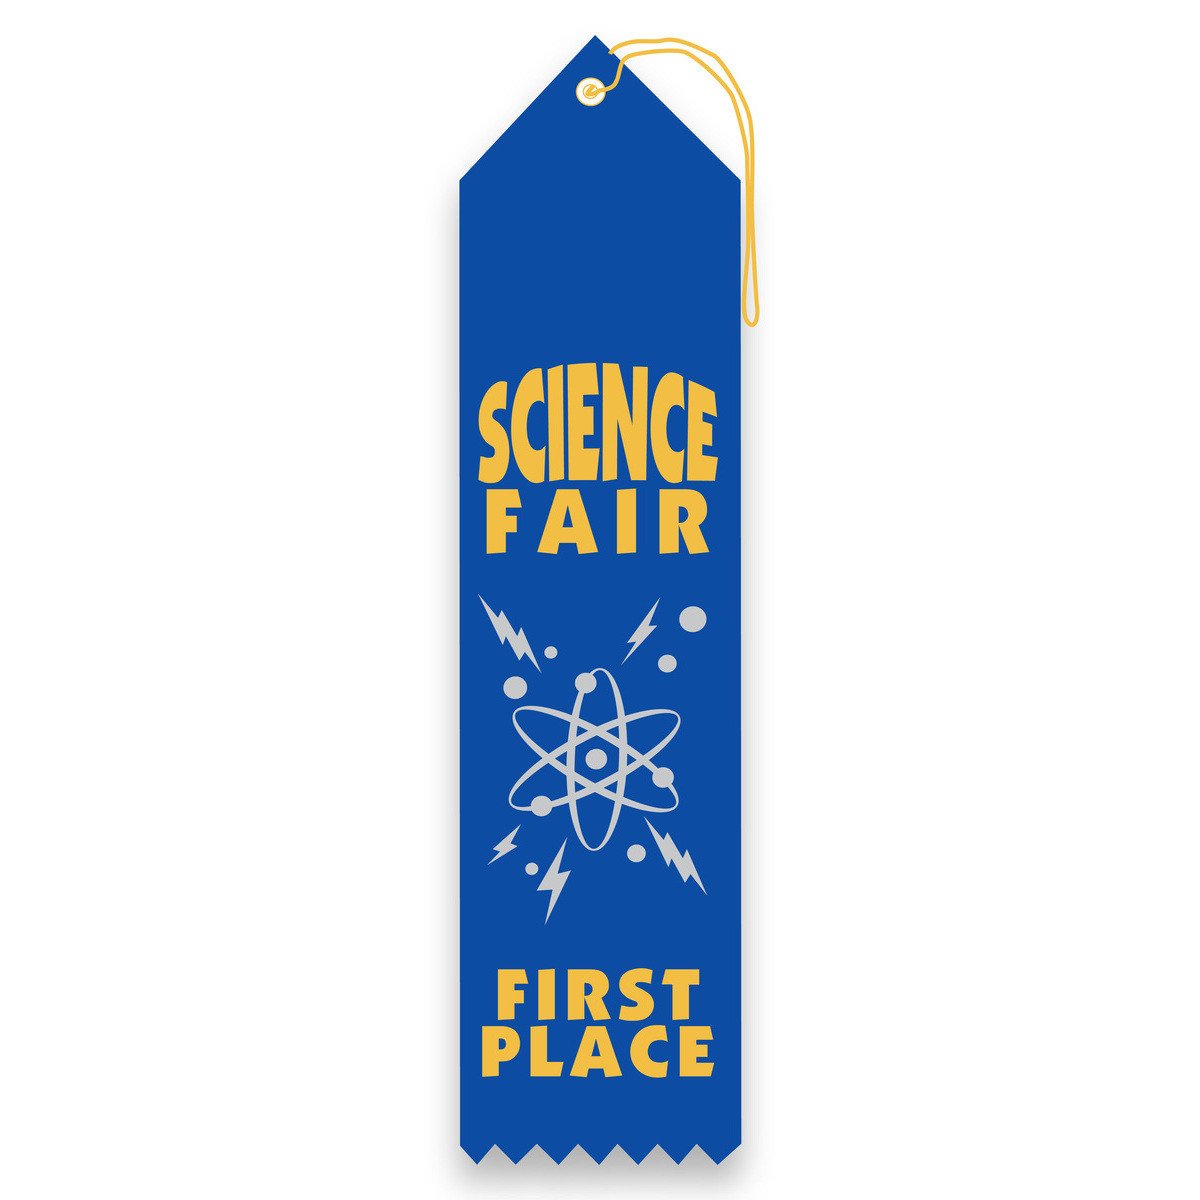 Carded Ribbon - Science Fair, 1st Place